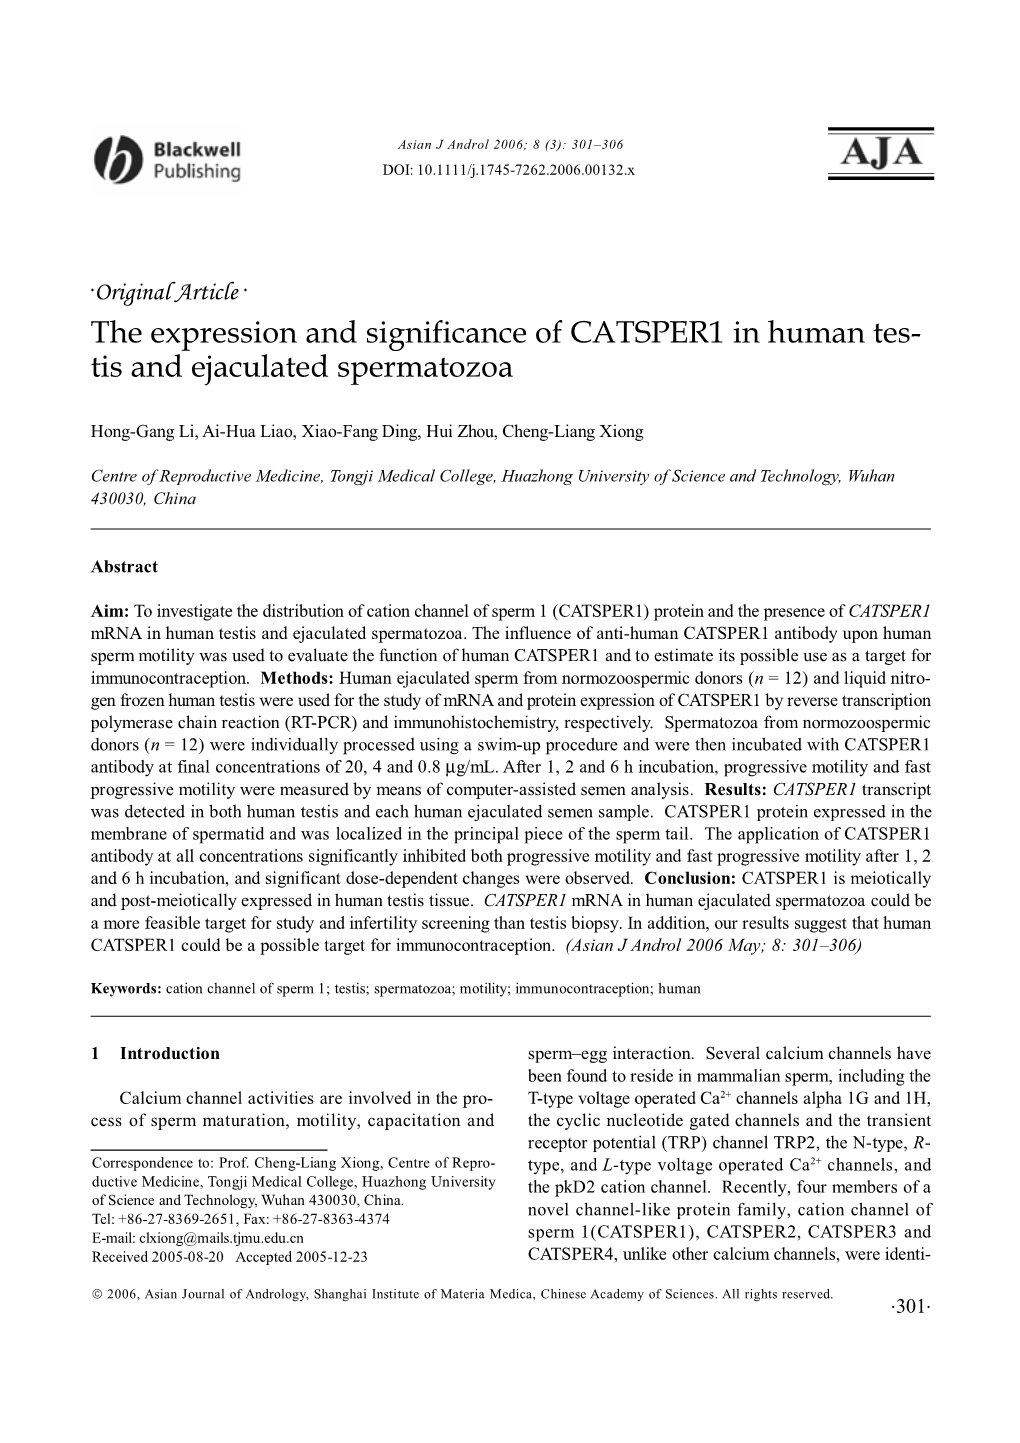 The Expression and Significance of CATSPER1 in Human Tes- Tis and Ejaculated Spermatozoa